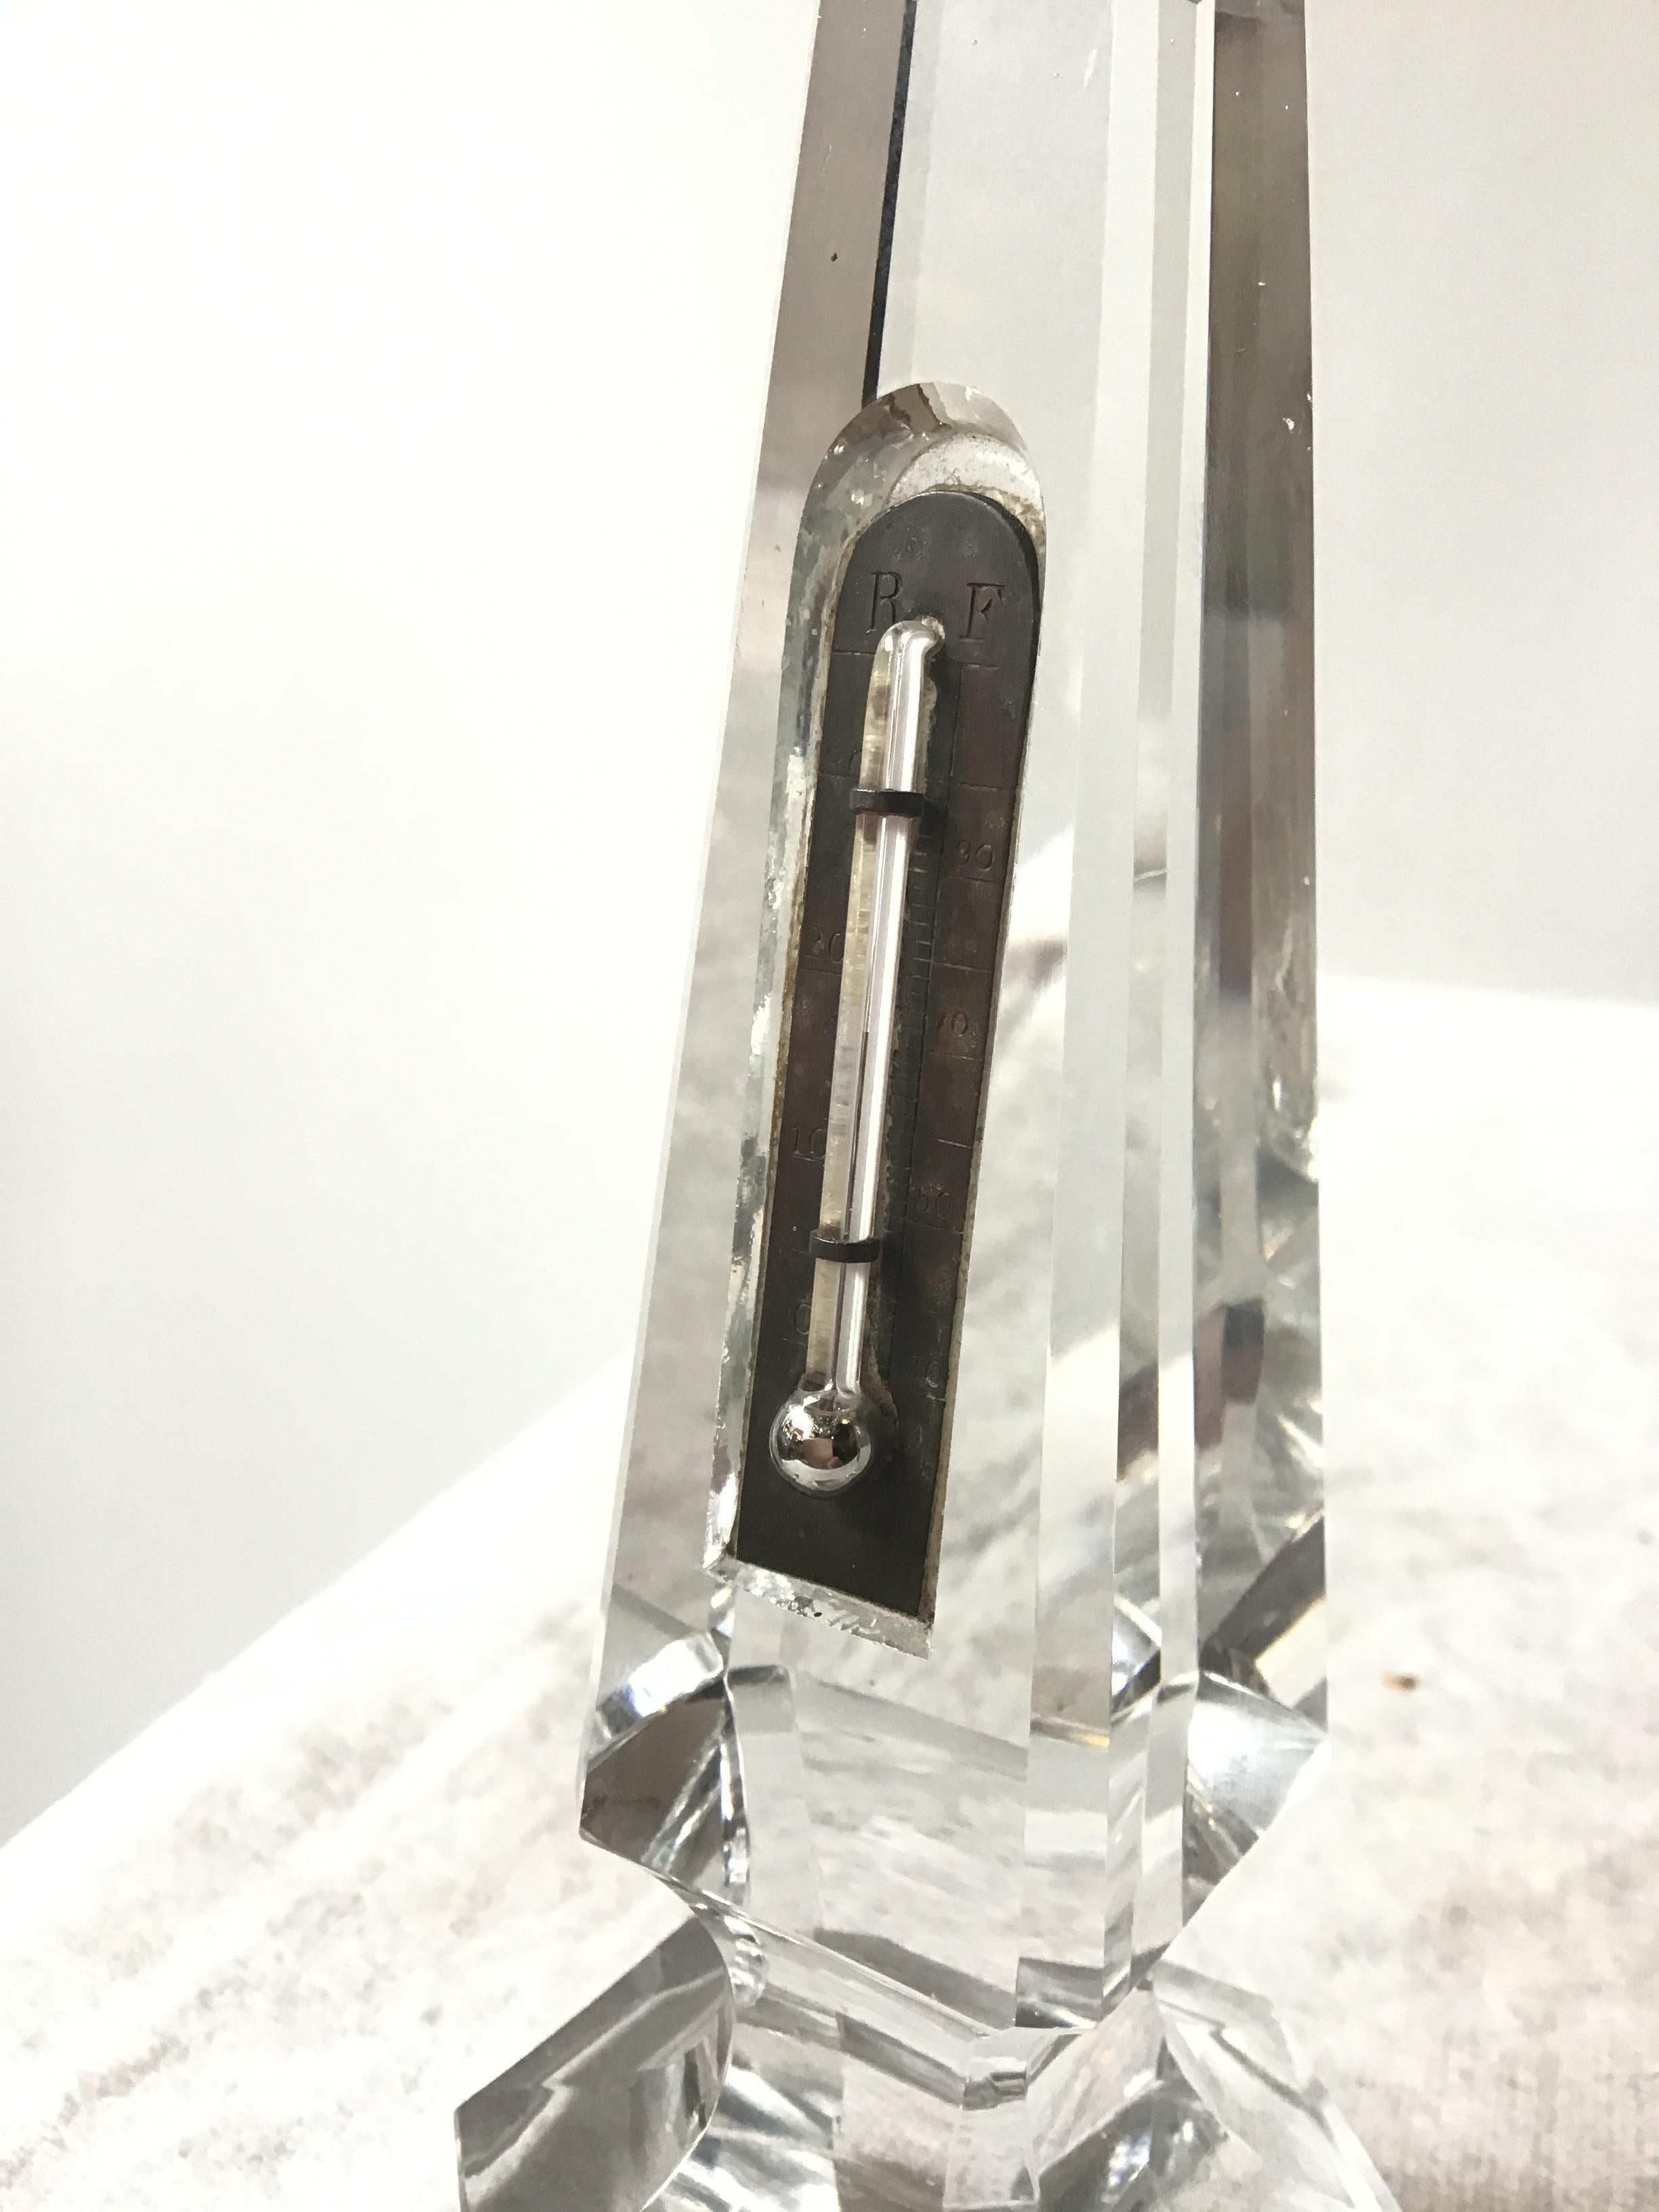 Late 19th Century 19th Century Glass Obelisk Thermometer For Sale